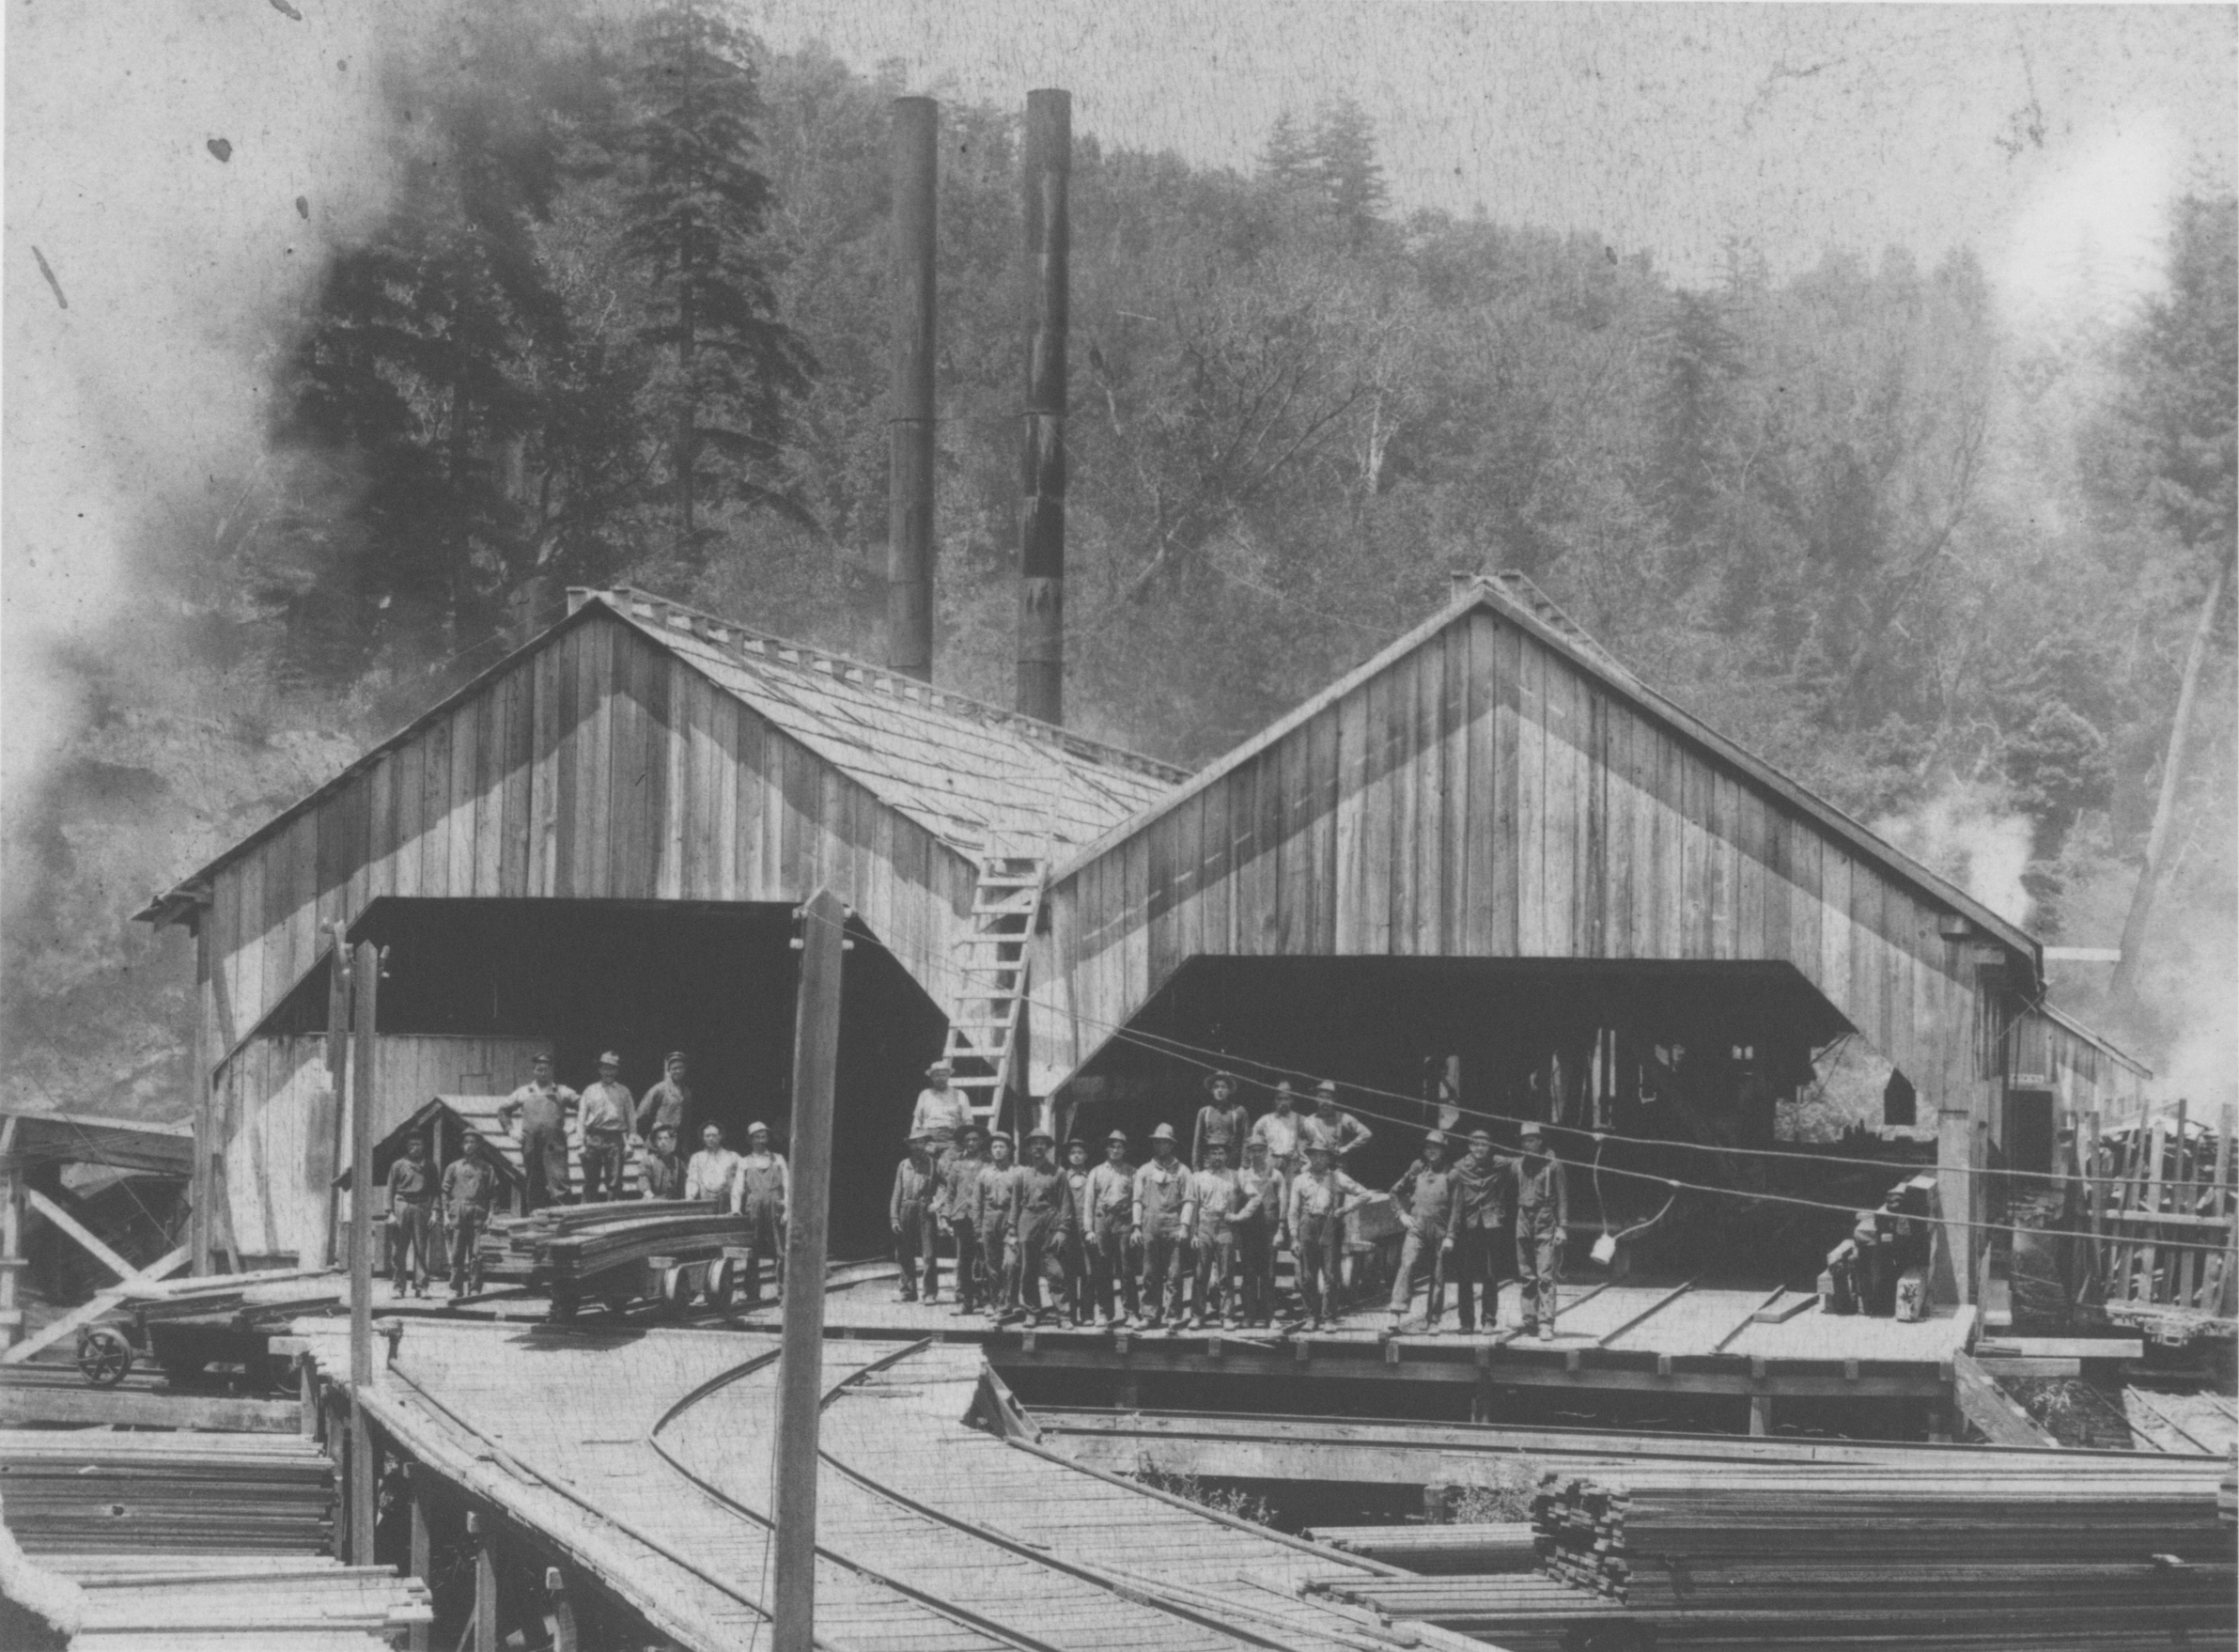 Wooden, peaked roof sheds with open ends and men gathered for the photograph on small scale rail lines at the mill.